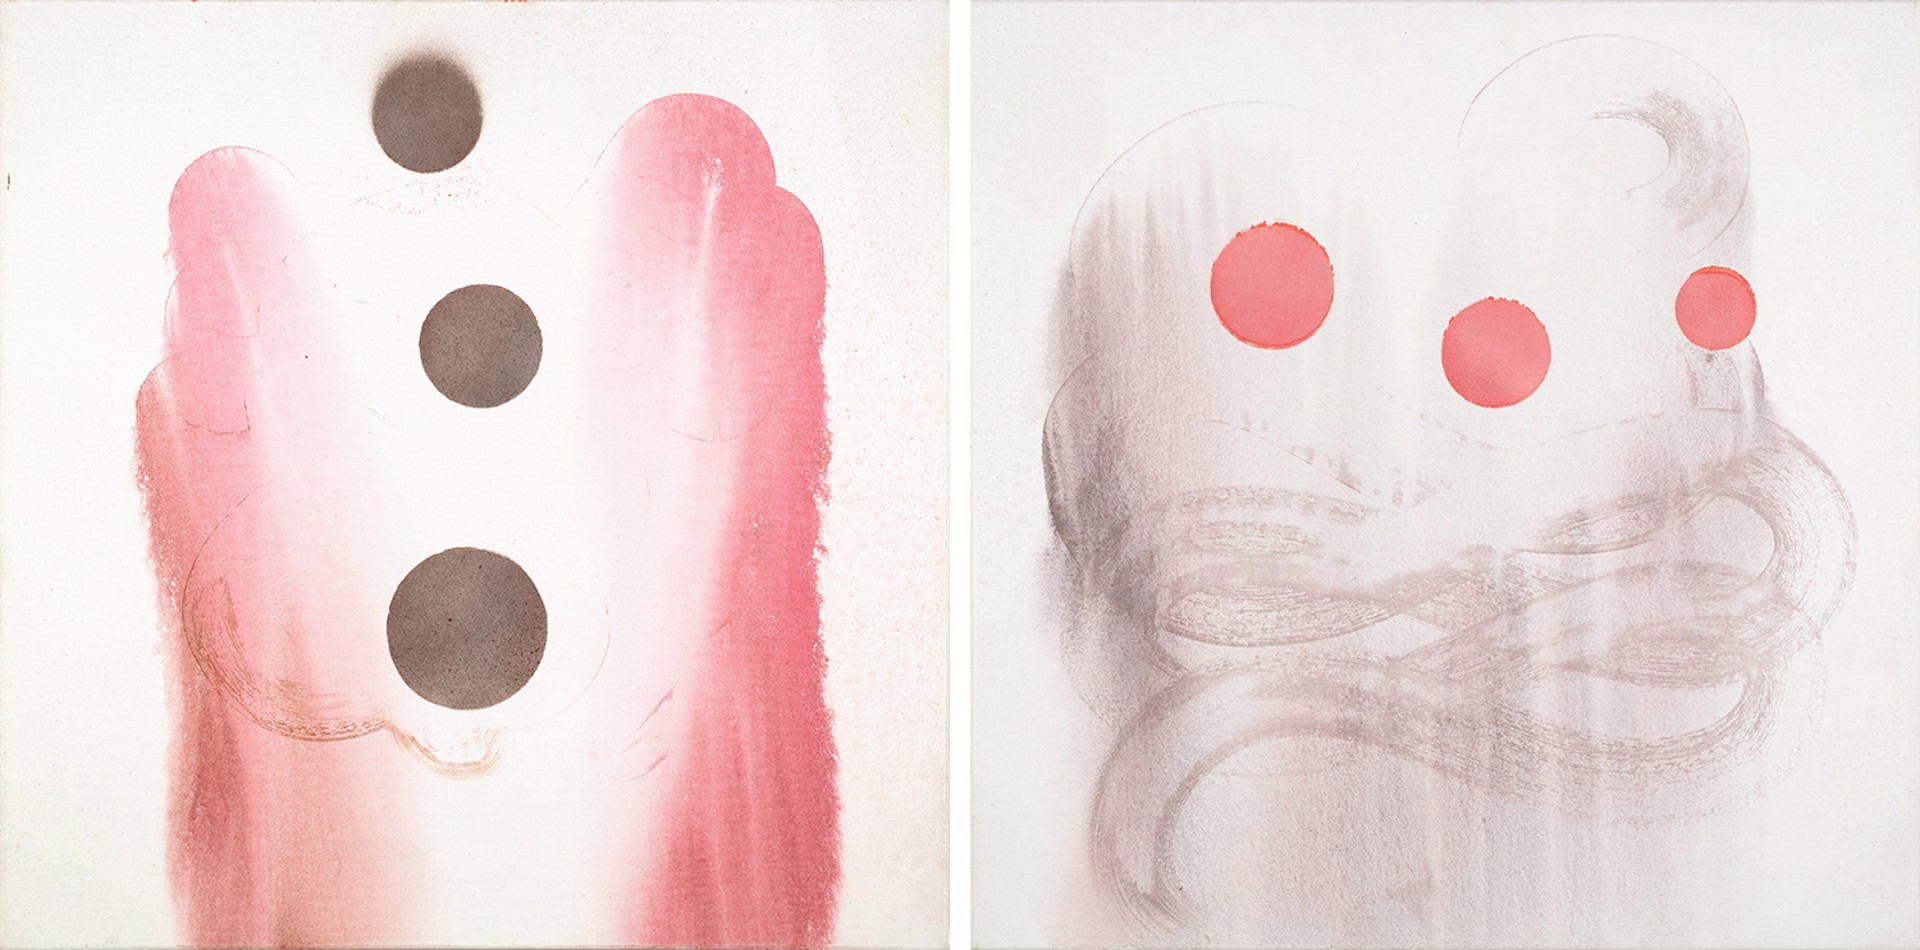 Liminal Spaces Diptych by Shawn Hall